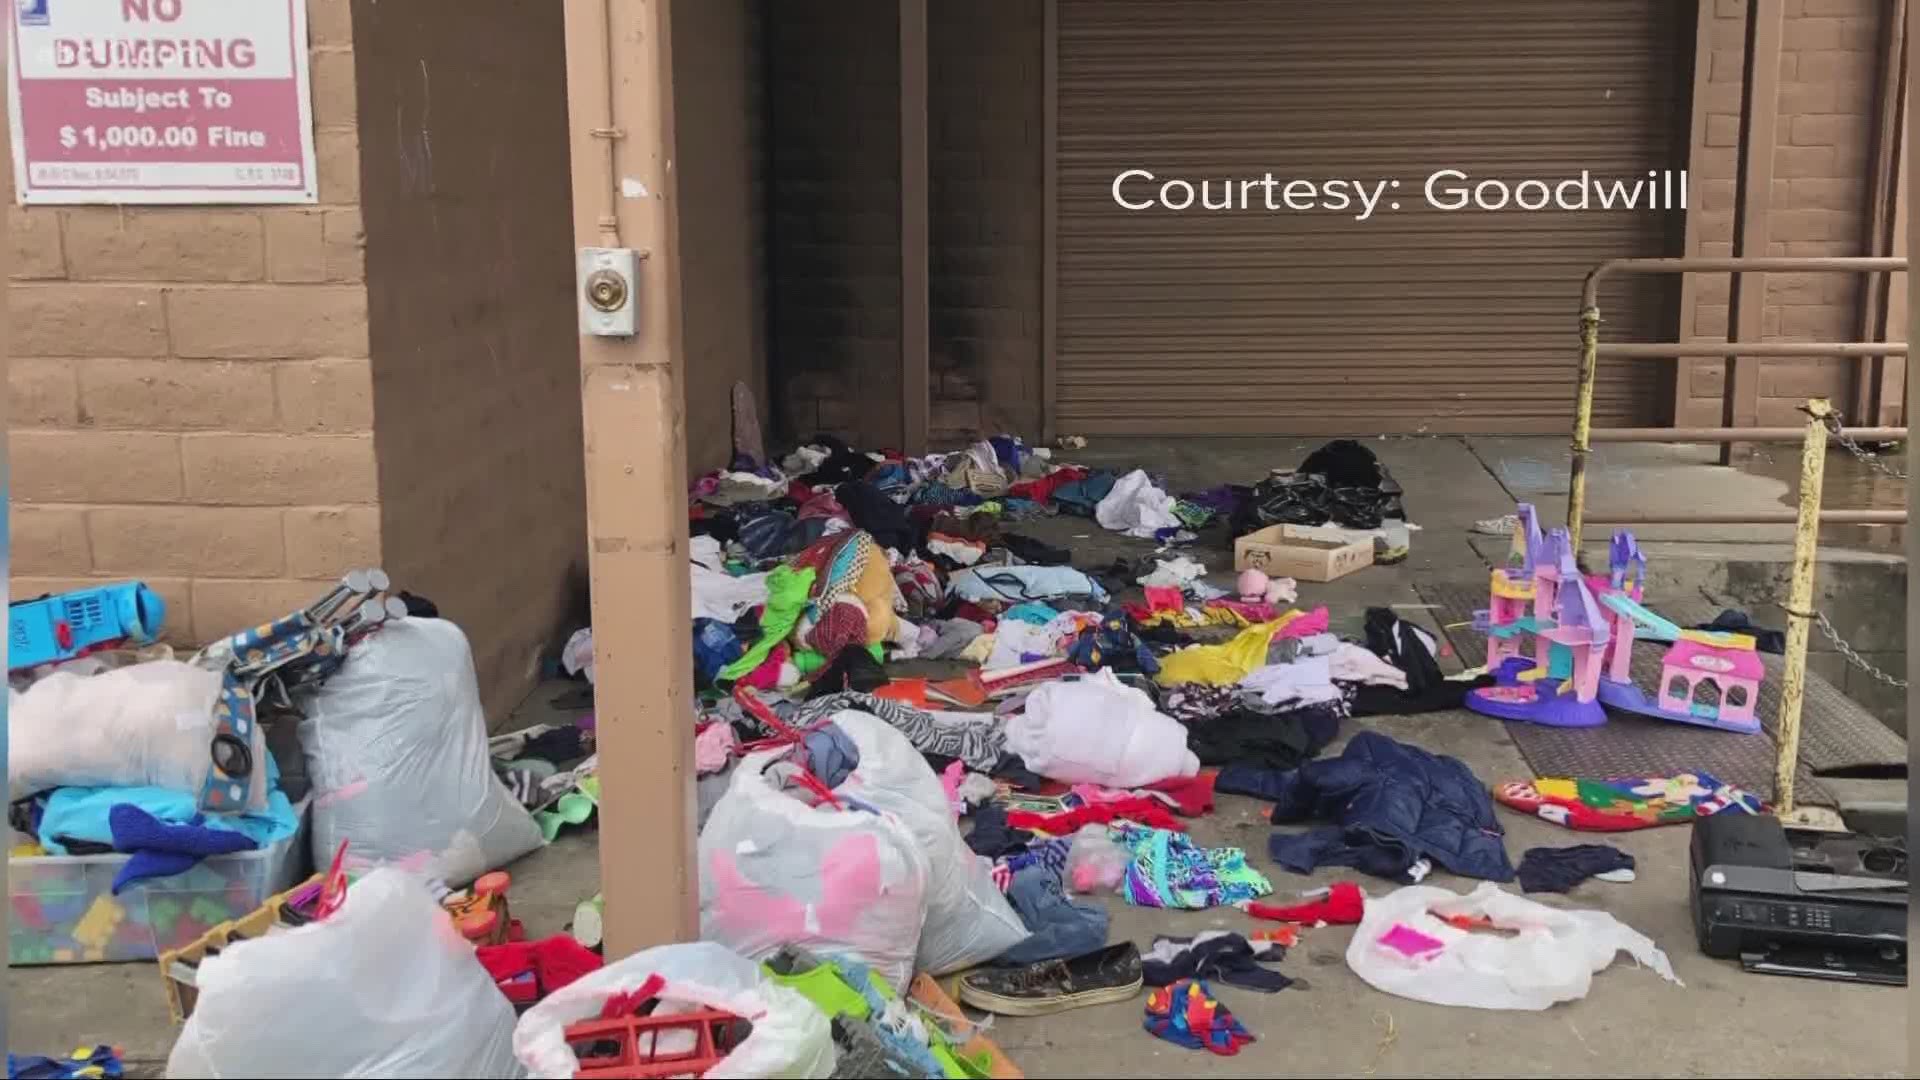 People have started leaving clothes and donations outside Goodwill locations.